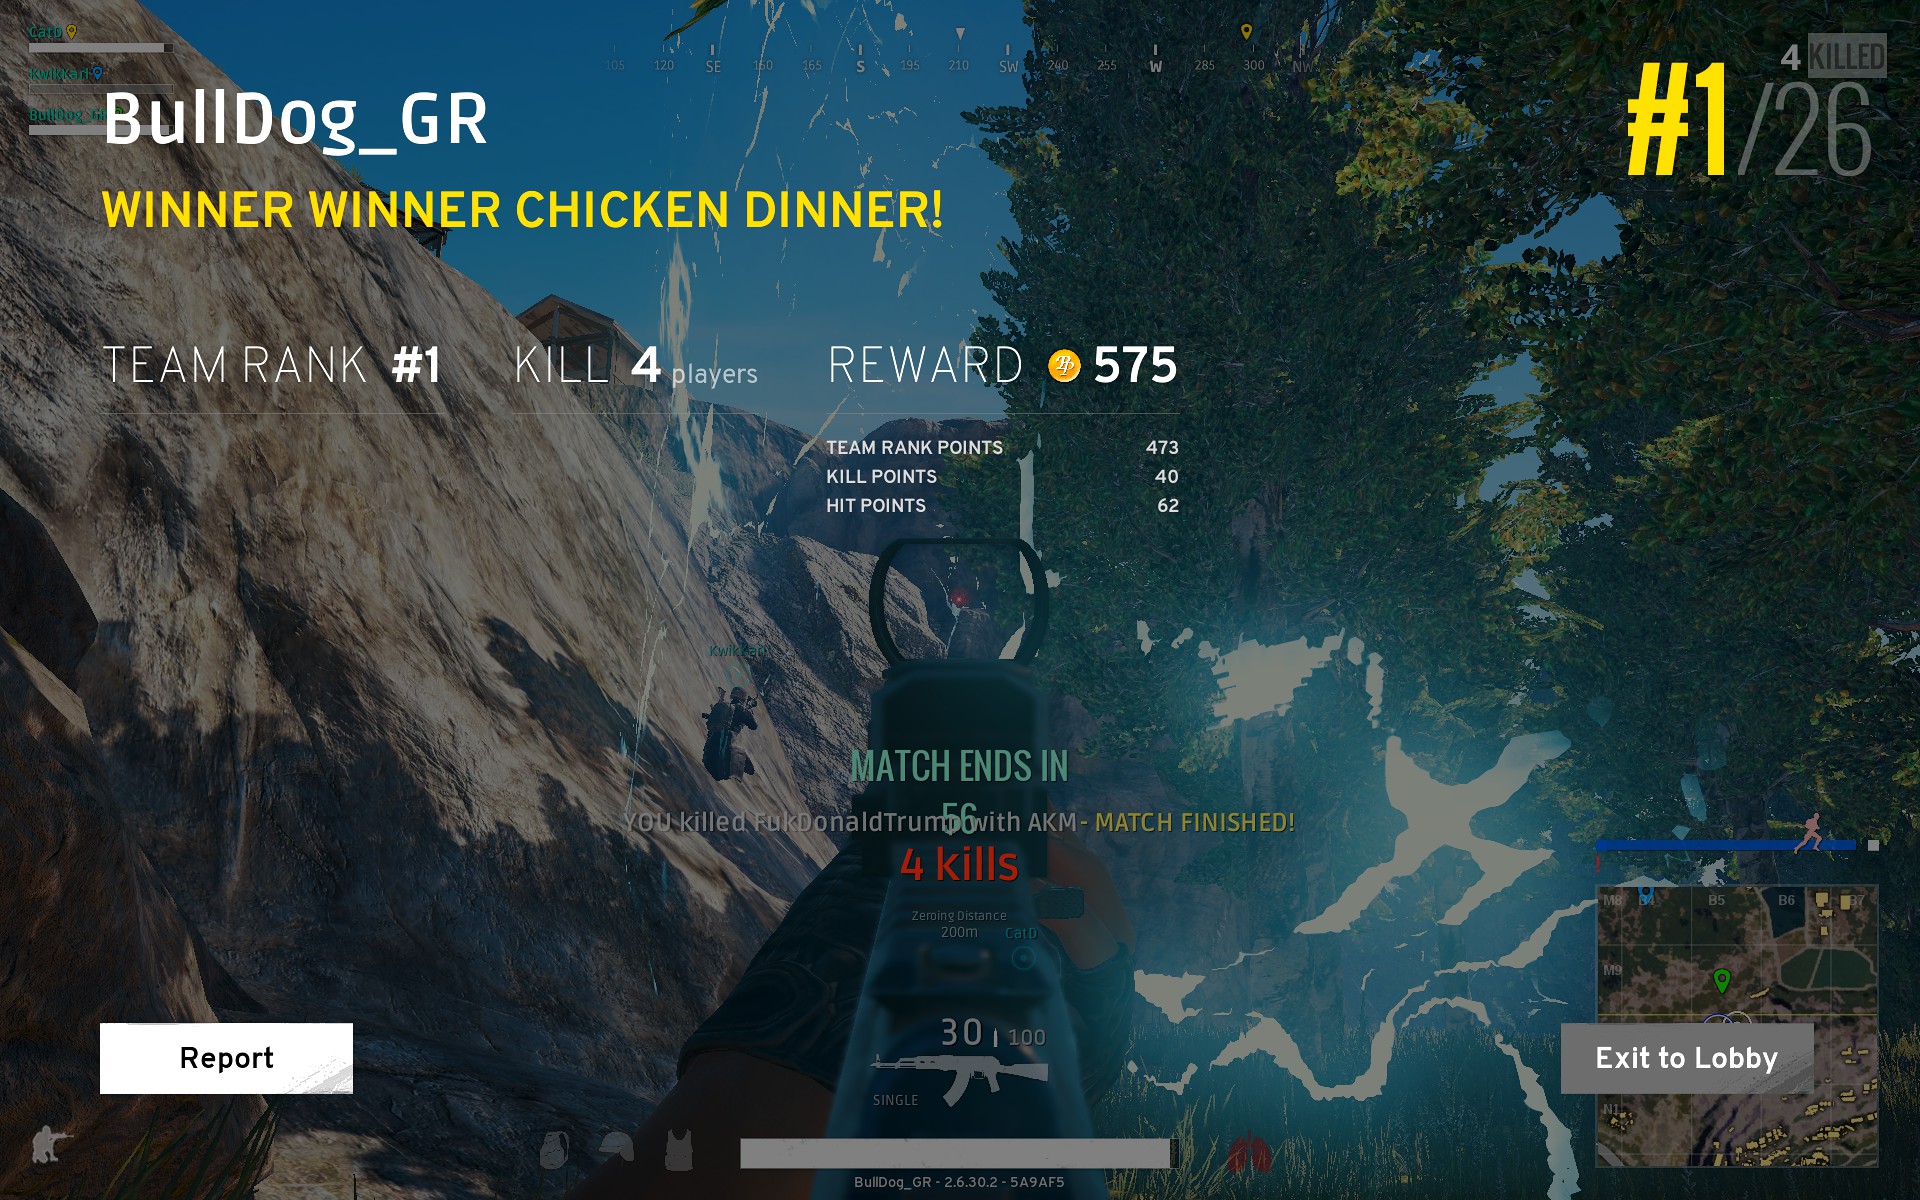 Lets see your Winner Winner Chicken Dinner screenshots! - Page 2 0C3A77212D1FF92F567B287F2EE21BCC93D73AE6